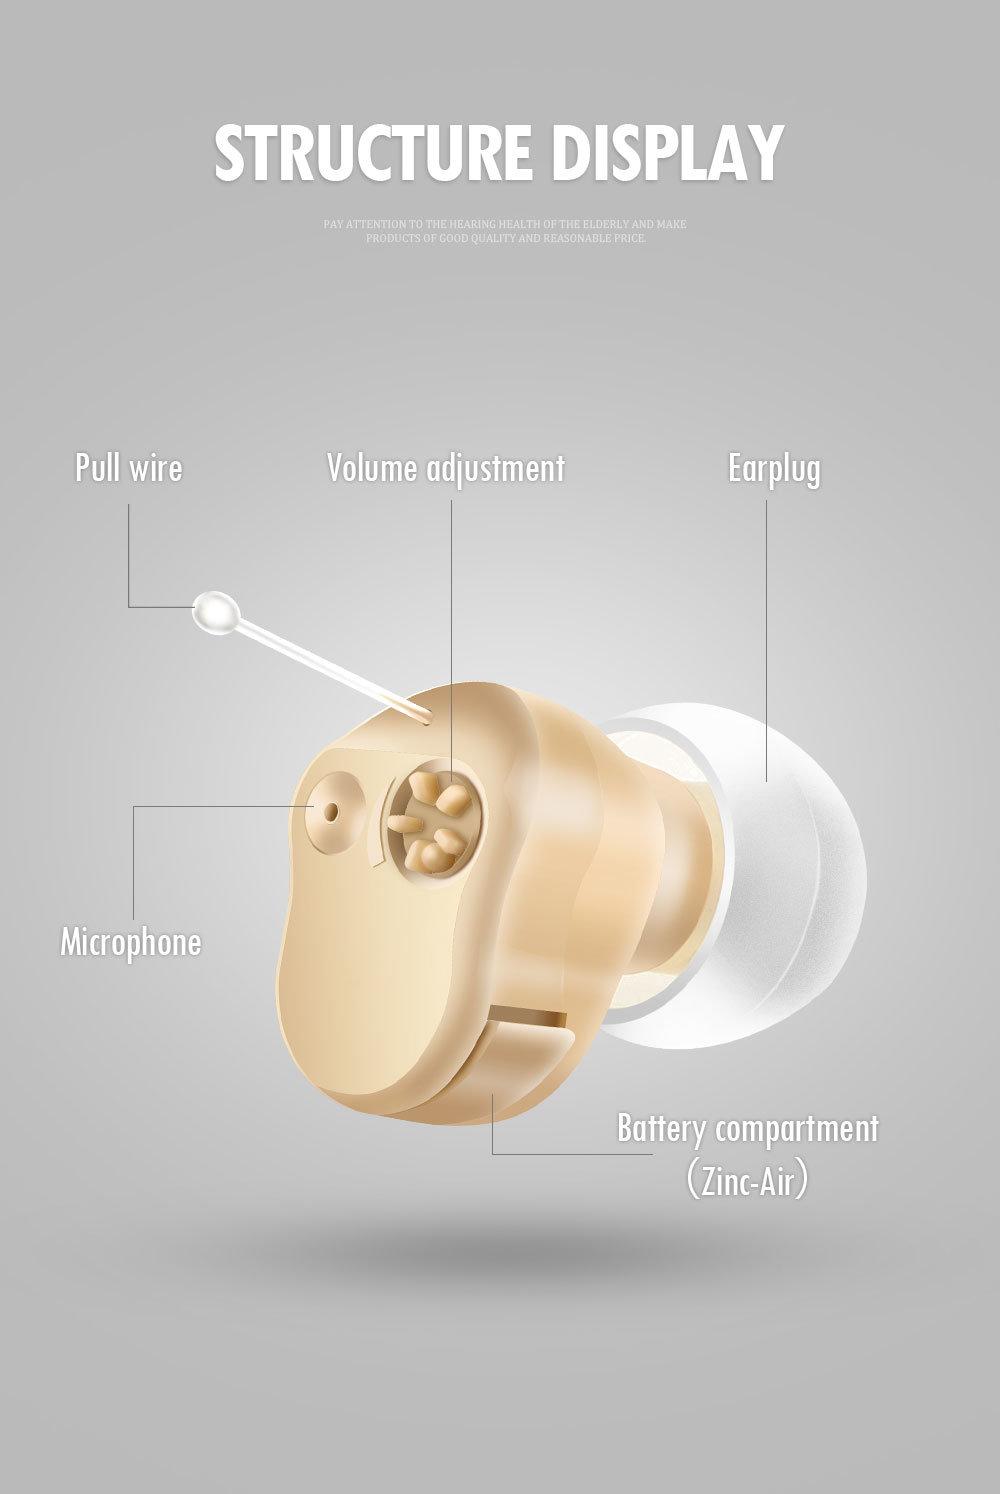 Mini in The Ear Style Invisible Wear Hearing Aid